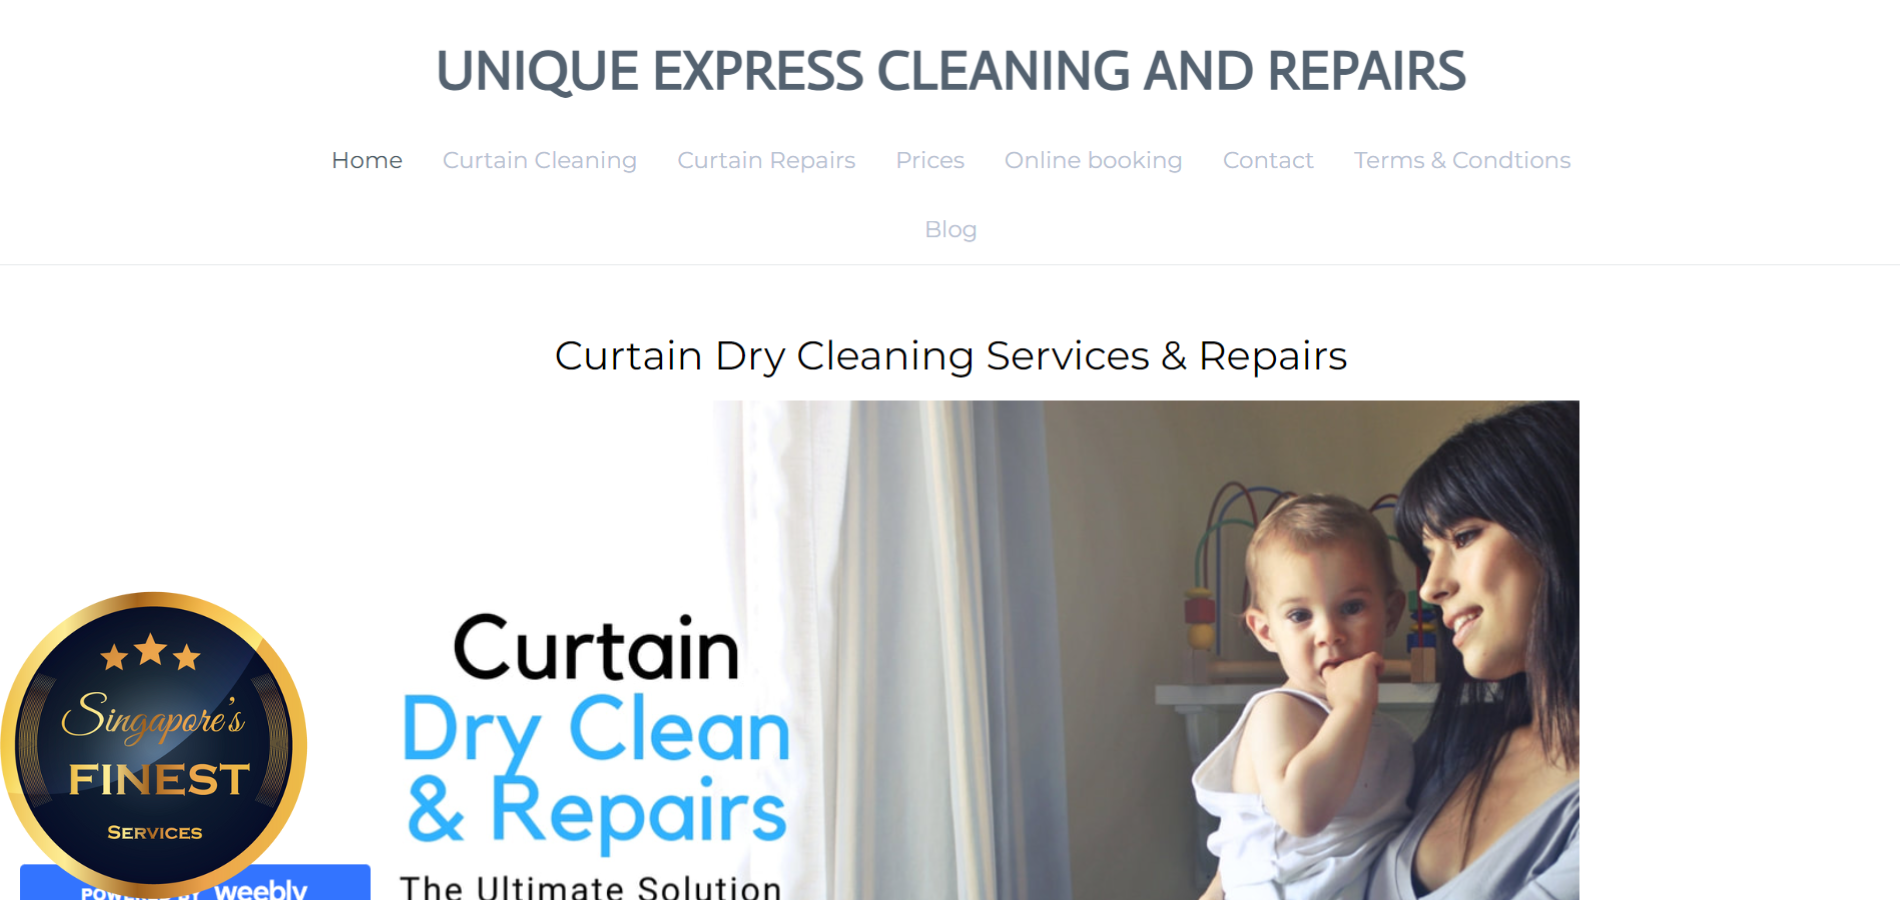 The Finest Curtain Cleaning Services in Singapore